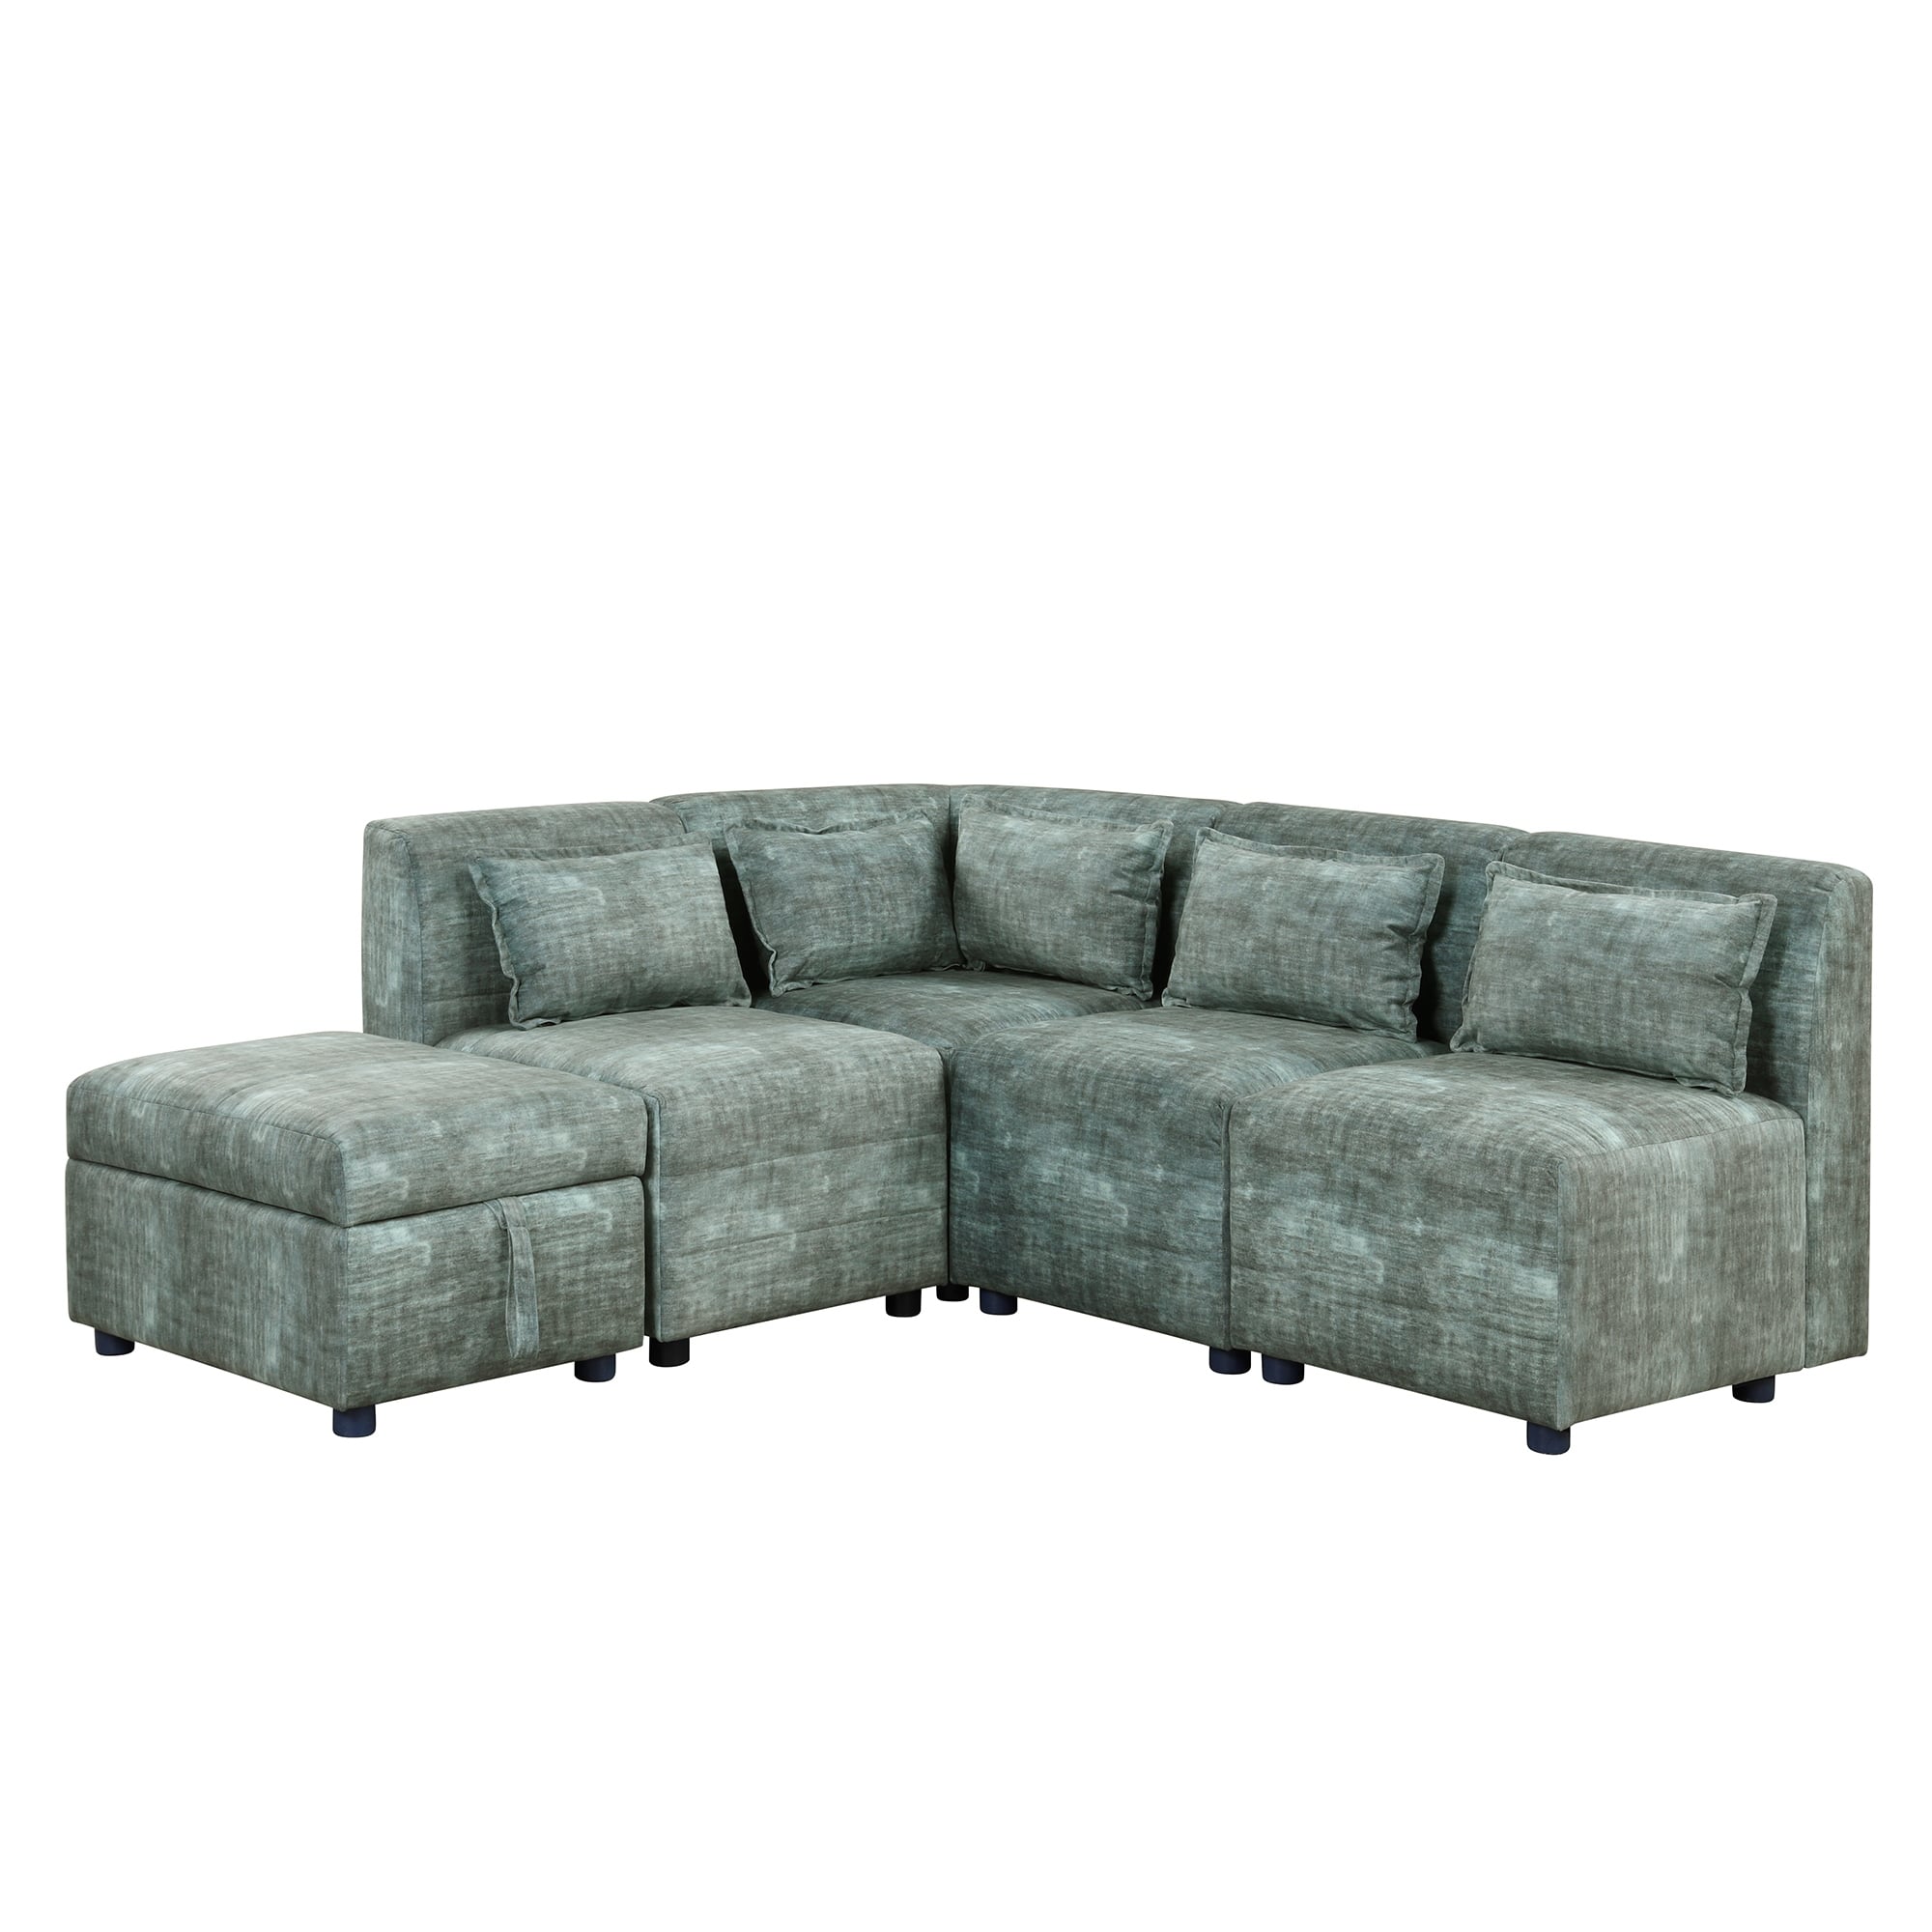 Blue-Green Chenille Fabric Sectional Sofa Sets L-shape Sectionals ...